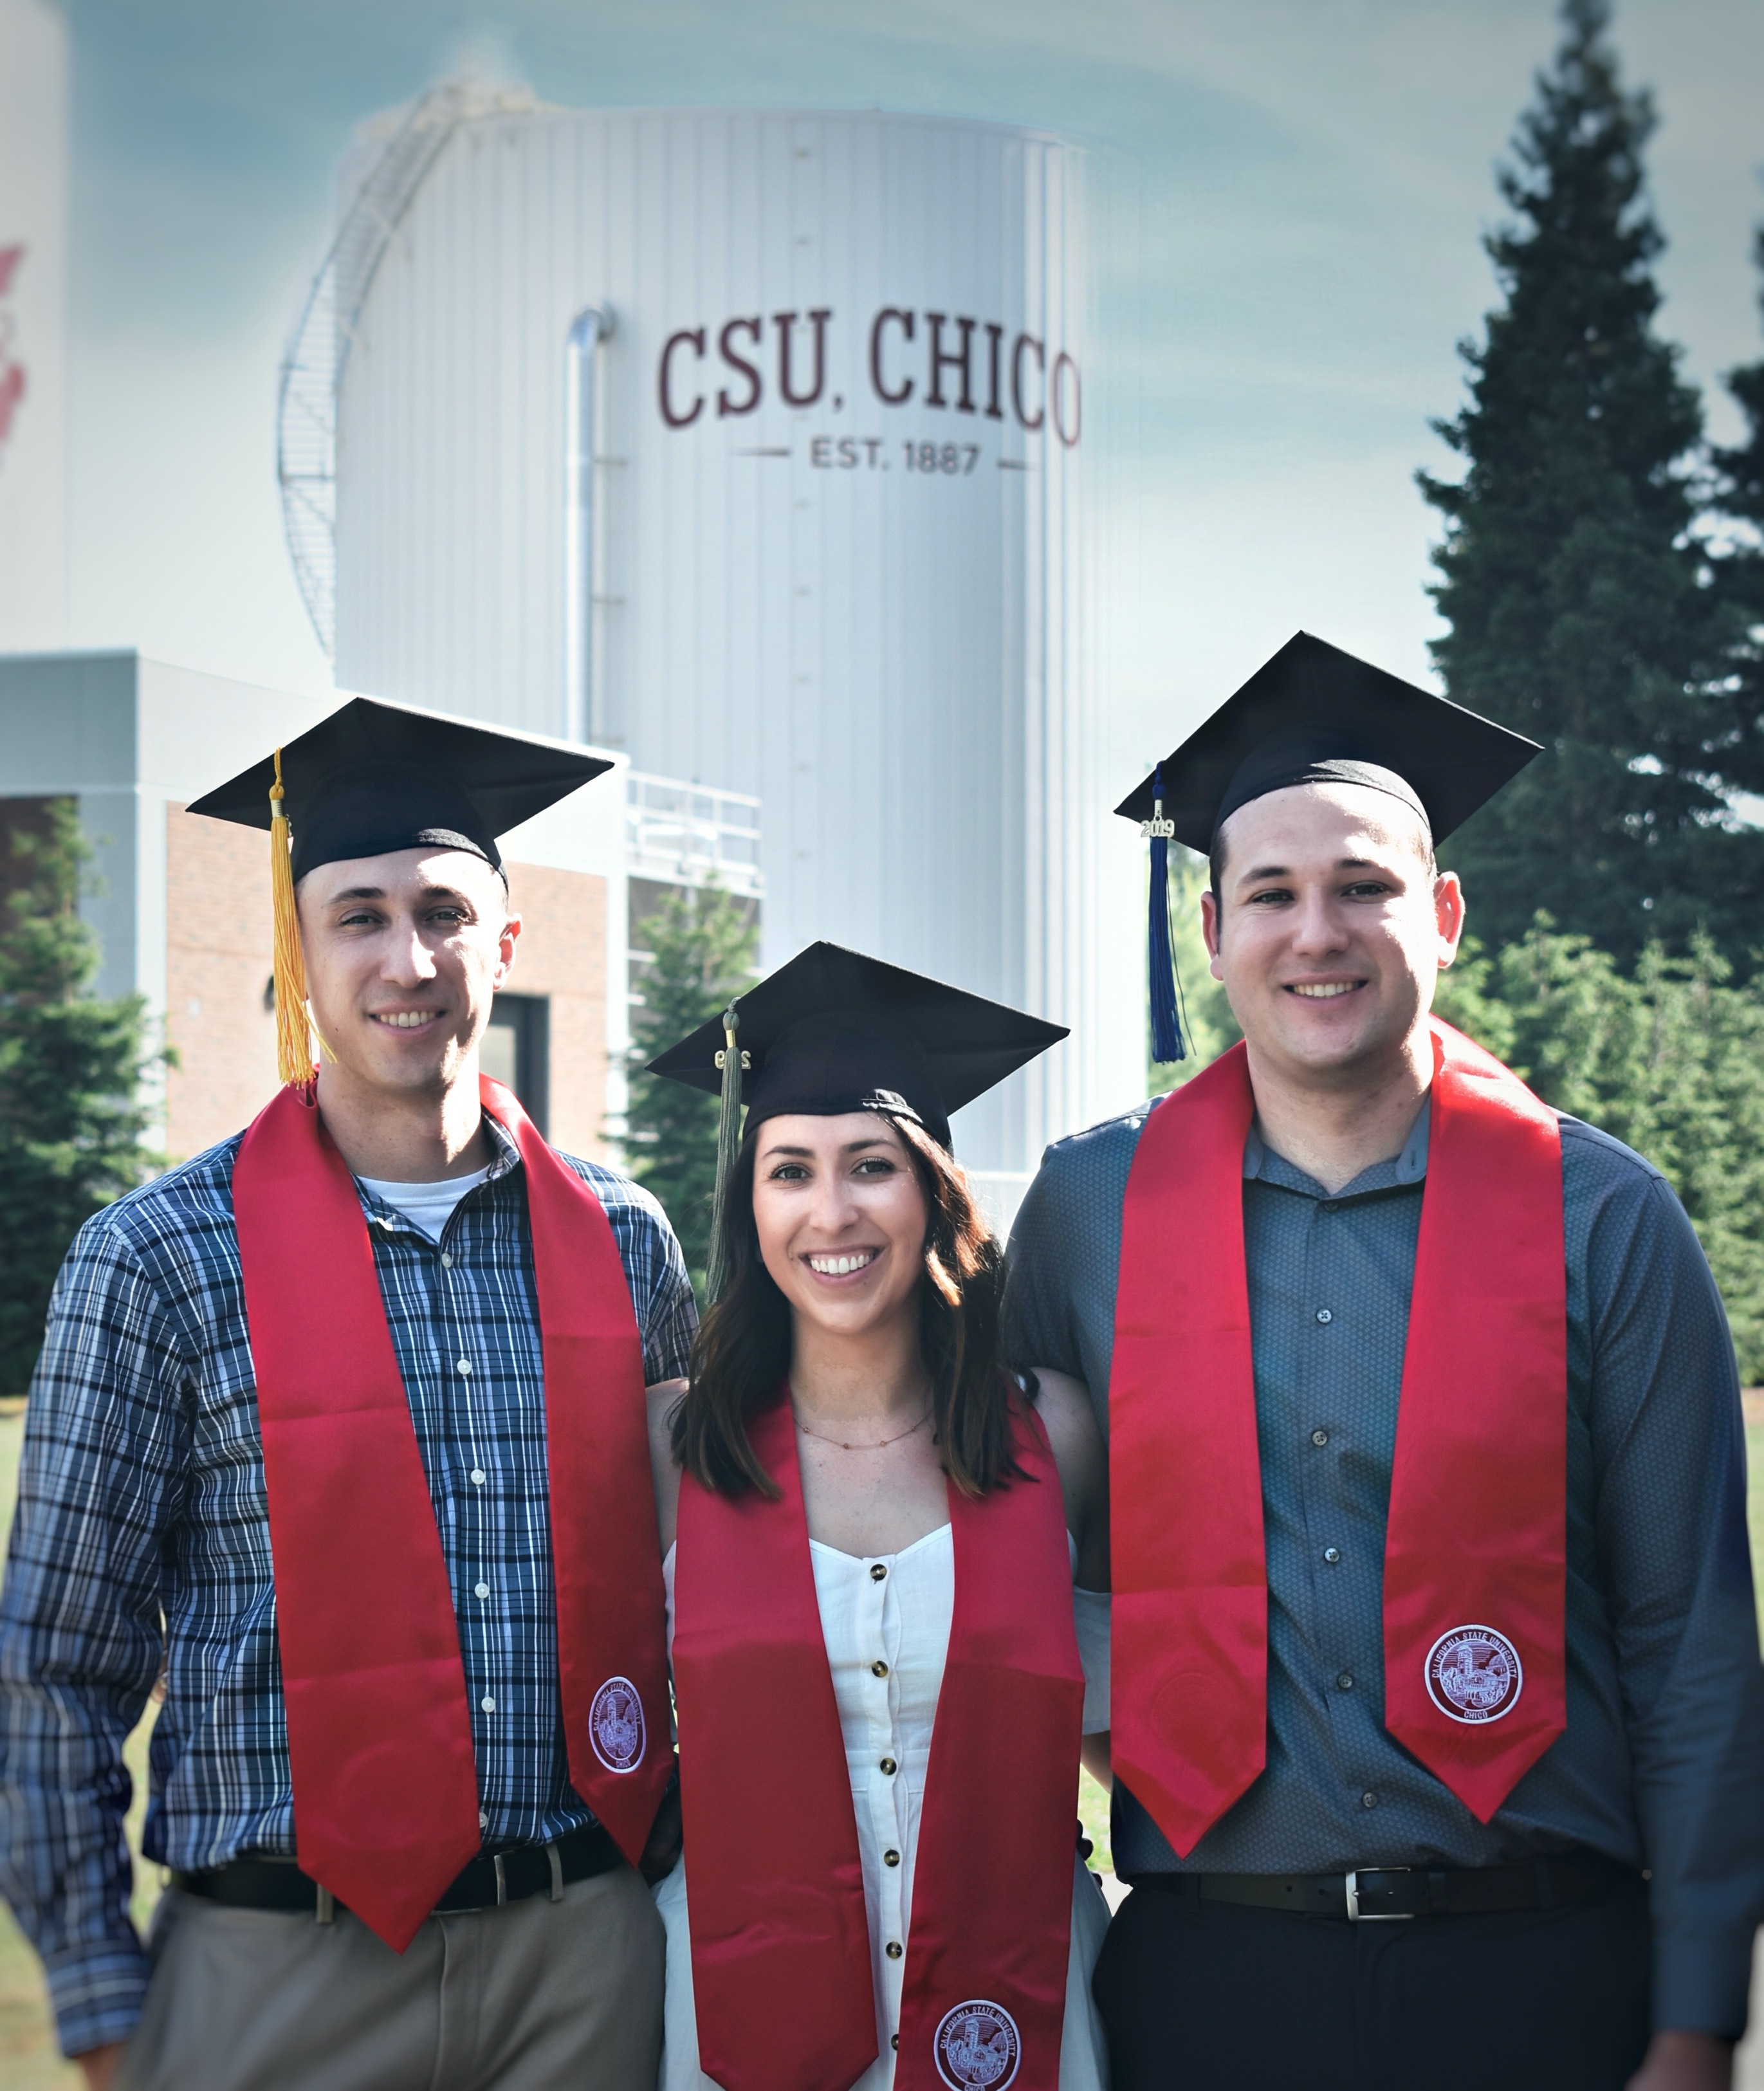 Siblings Nick, Kayla, and AJ Gonzales wear their Chico State stoles as they stand in front of the boiler-chiller towers that say "Chico State."